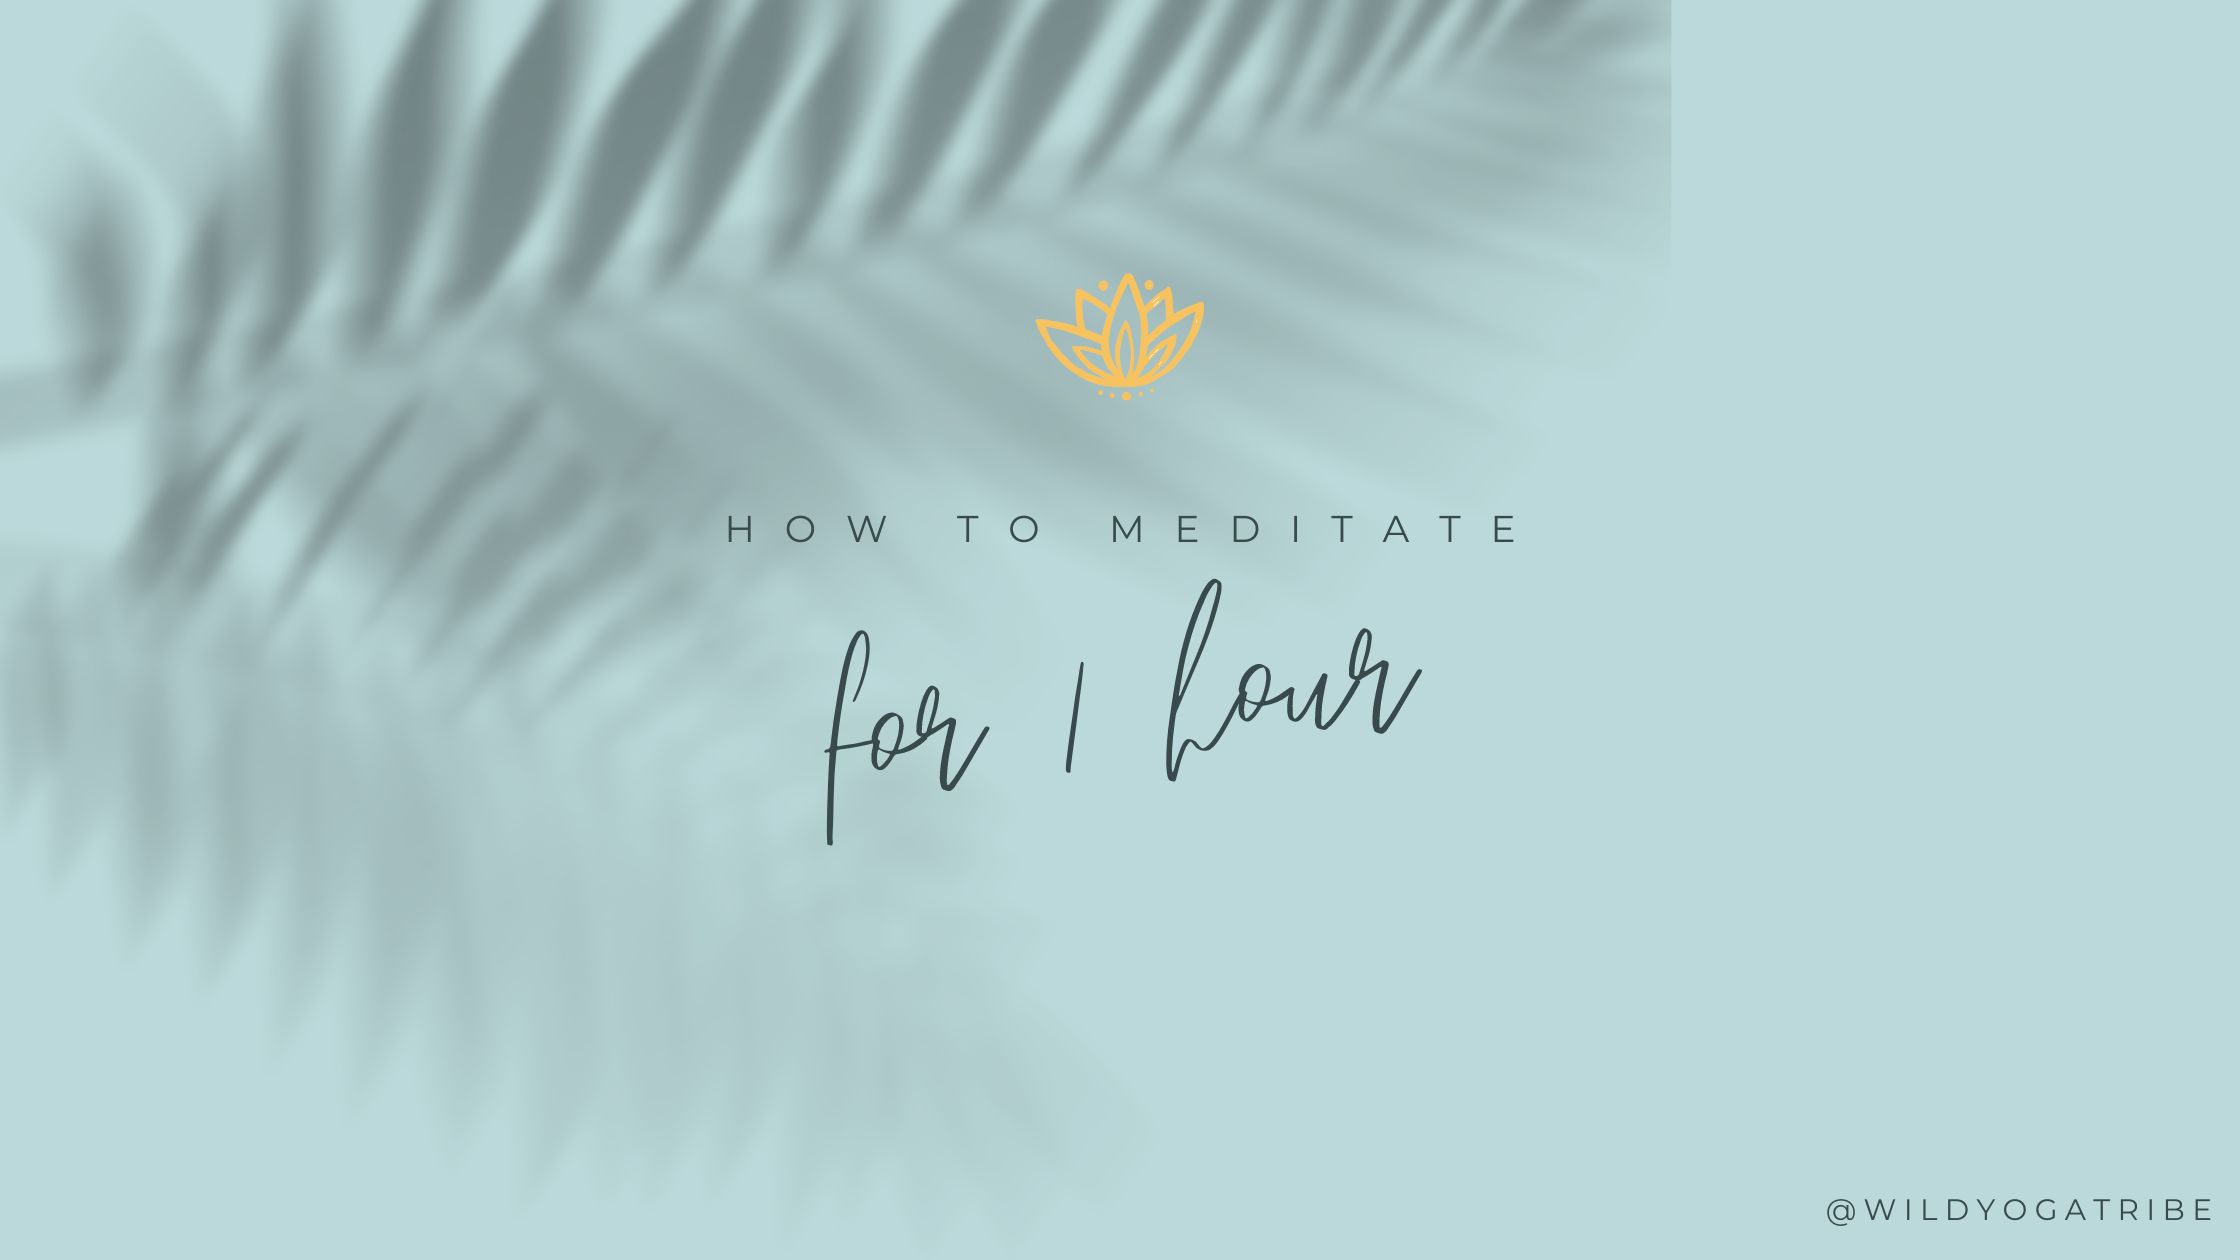 How to Meditate for One Hour